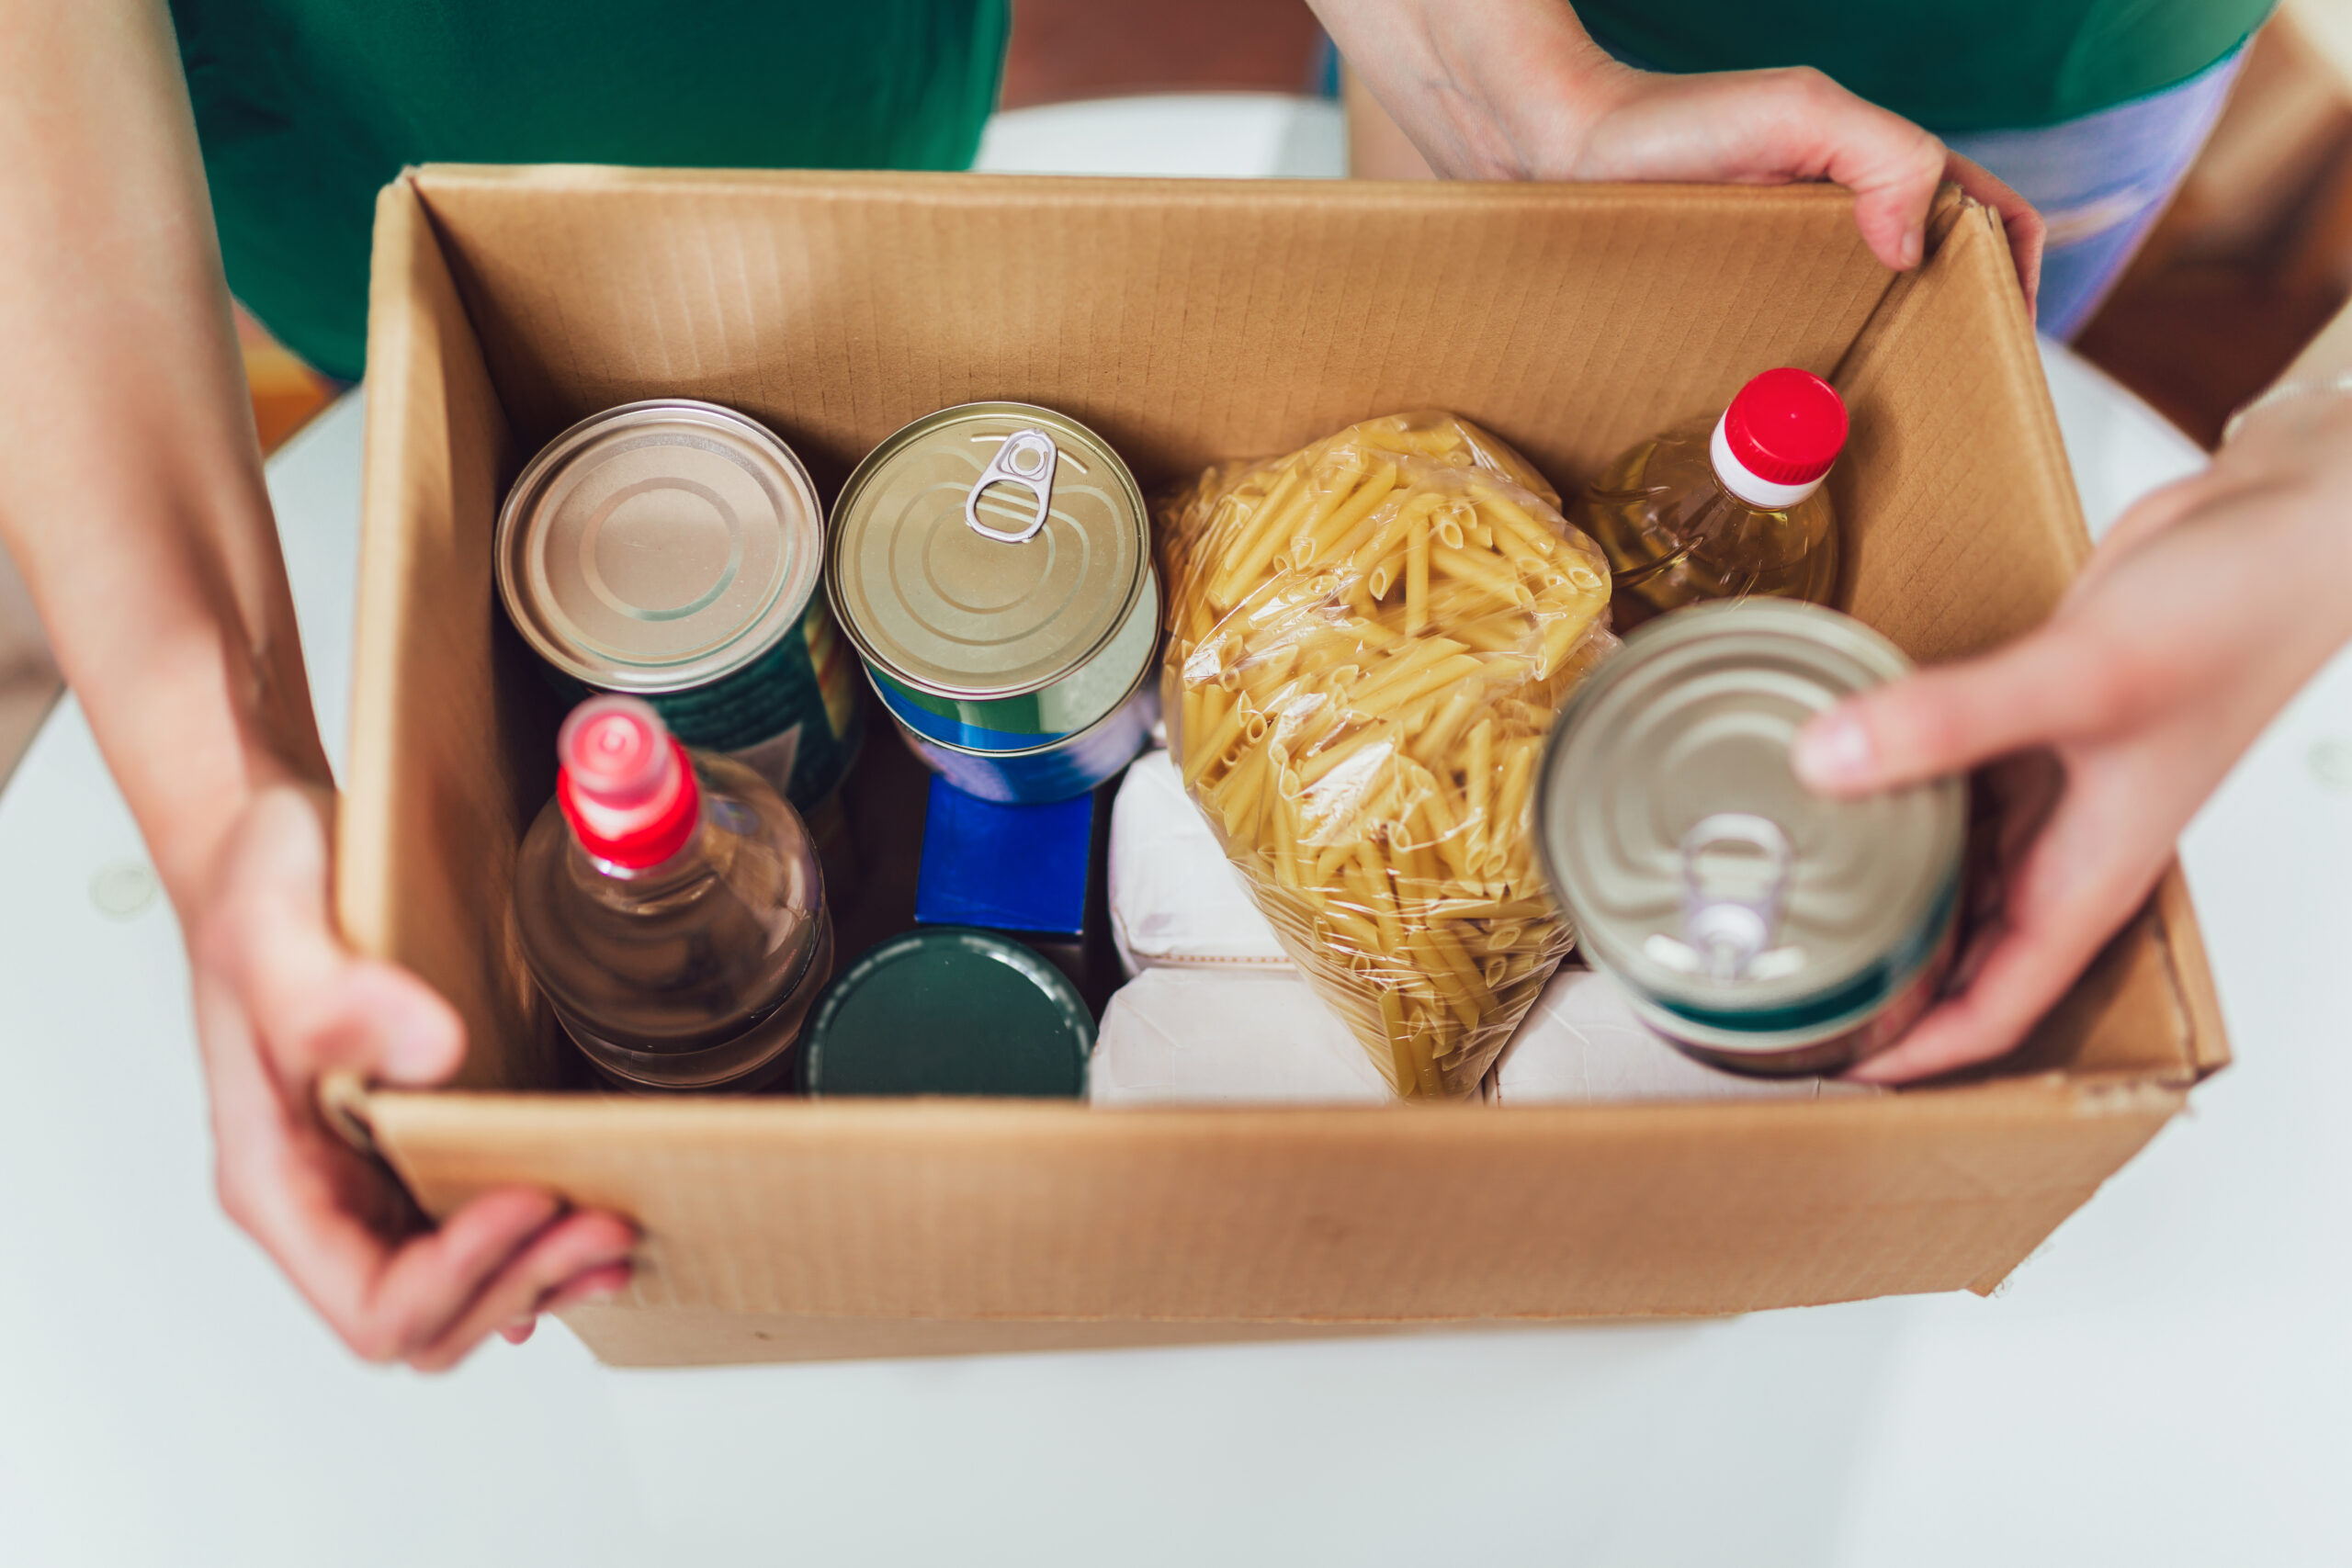 Making your food parcel go further